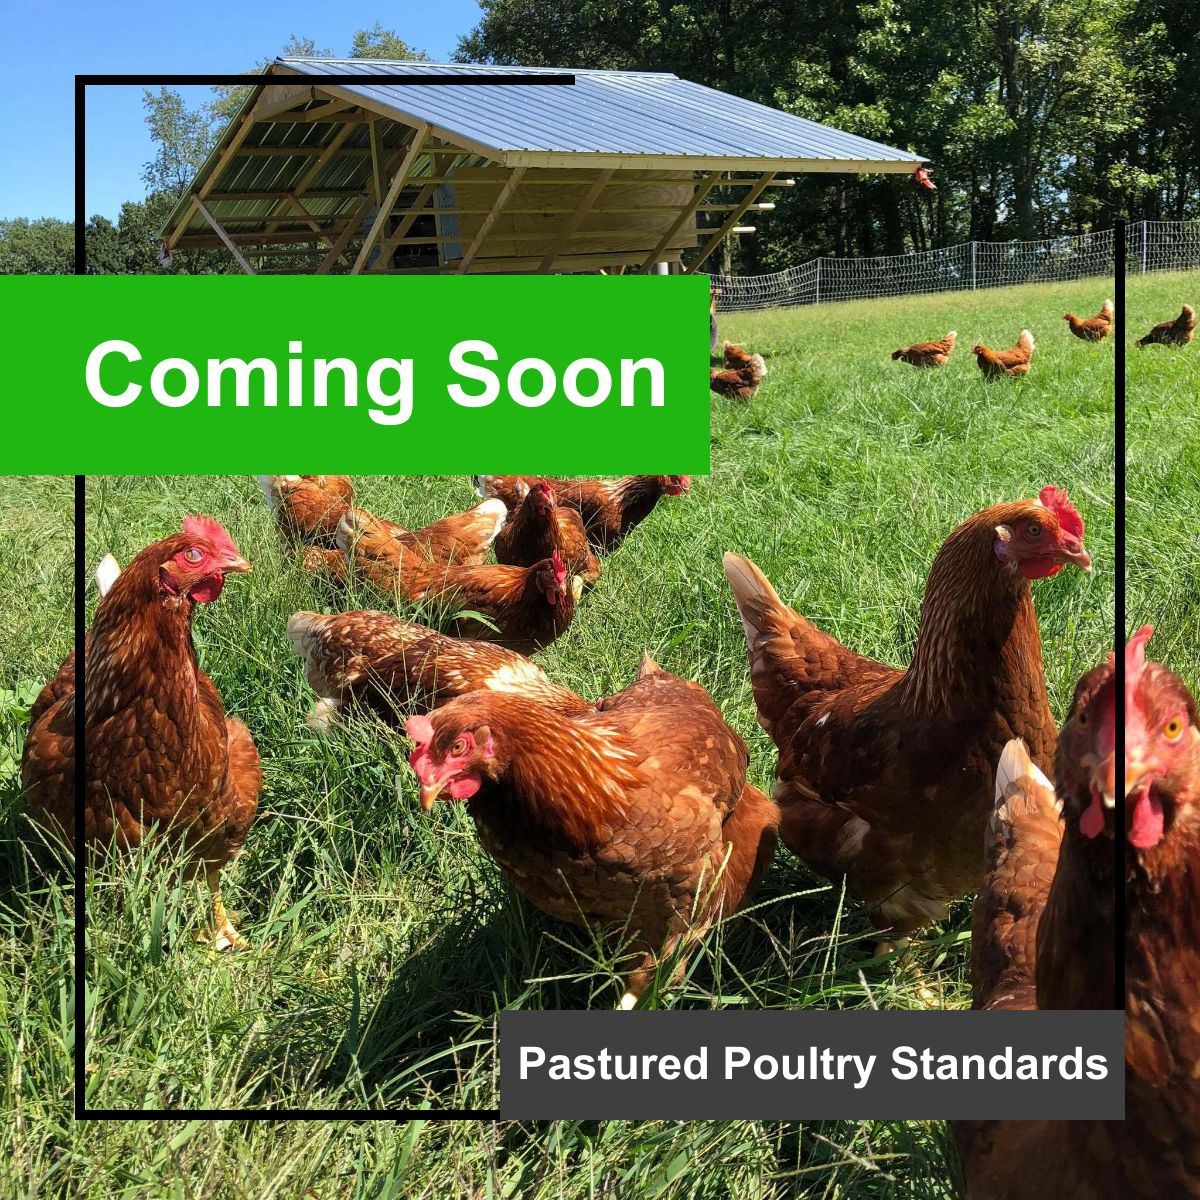 hens on pasture - standards coming soon 